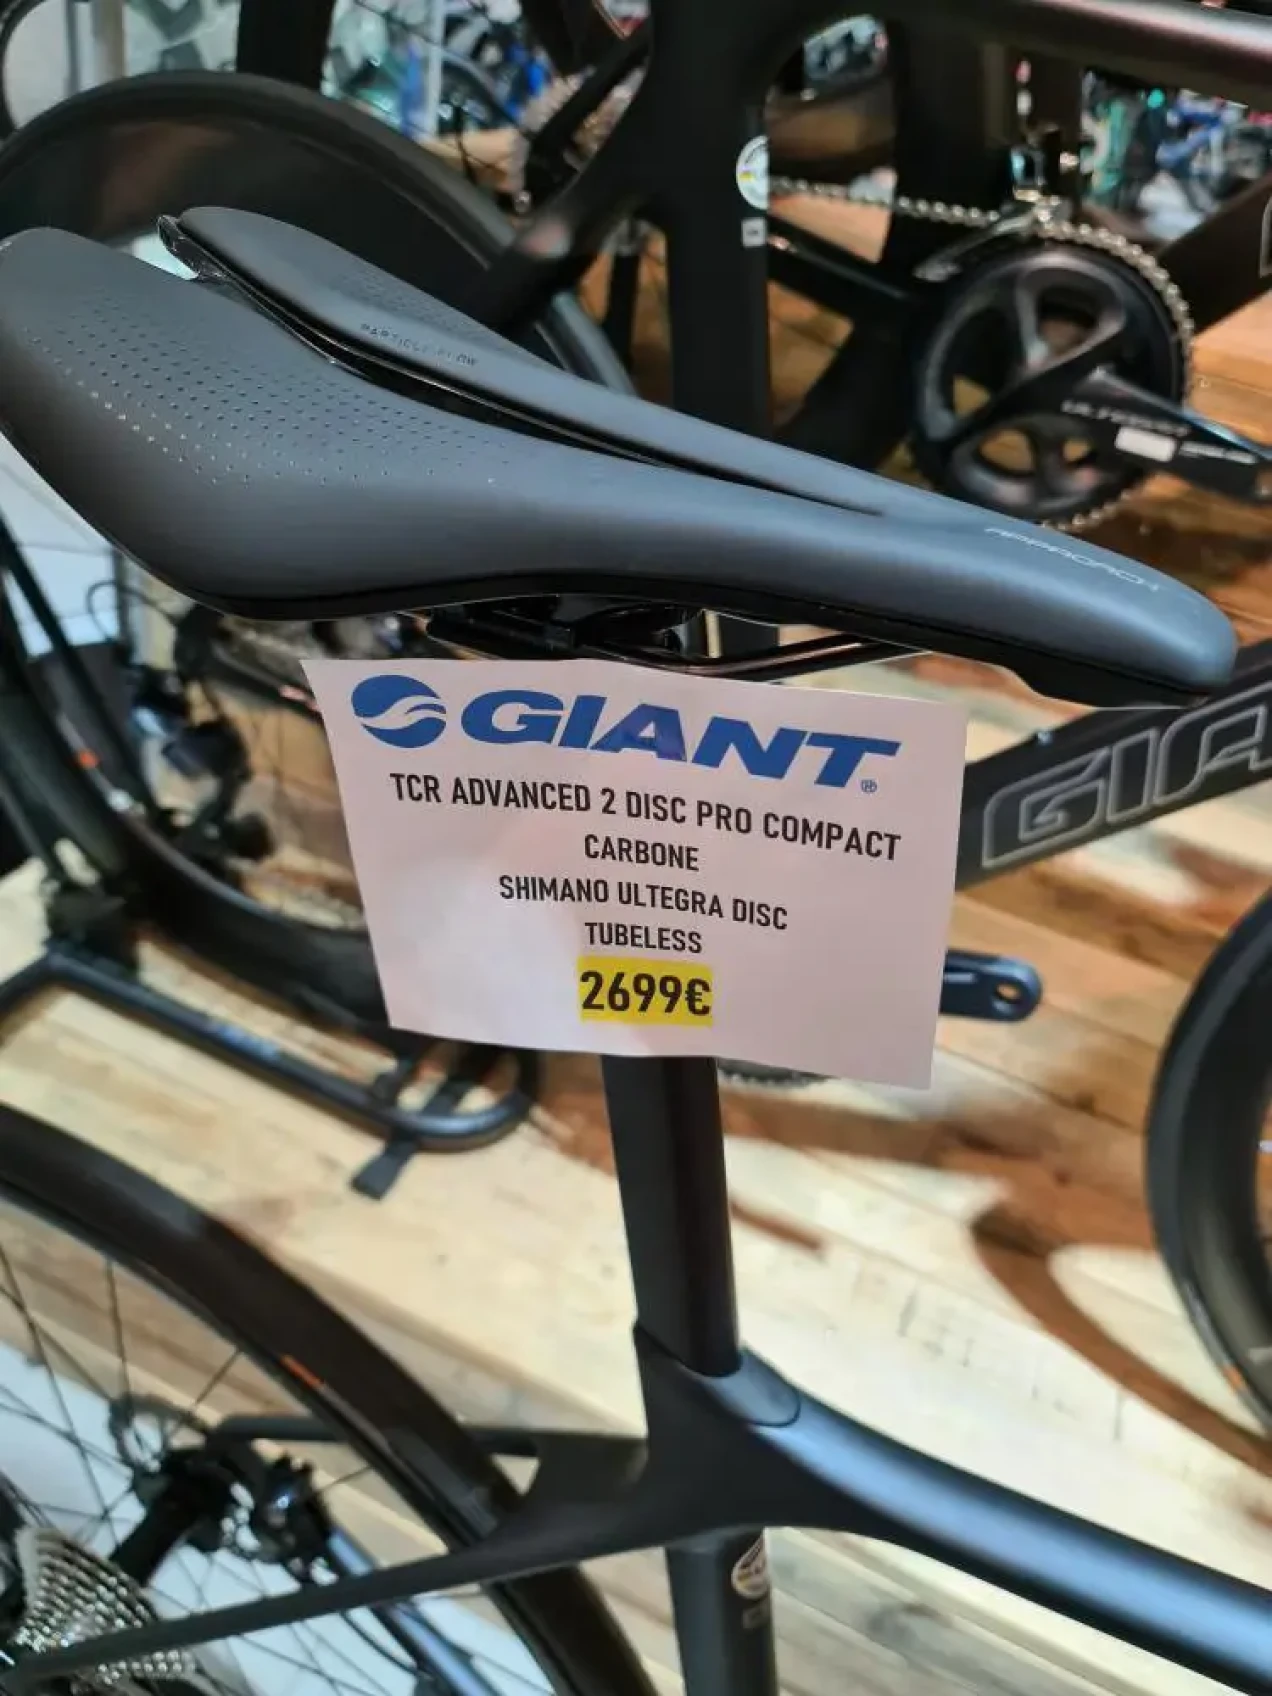 Giant TCR Advanced Disc 2 Pro Compact i m buycycle